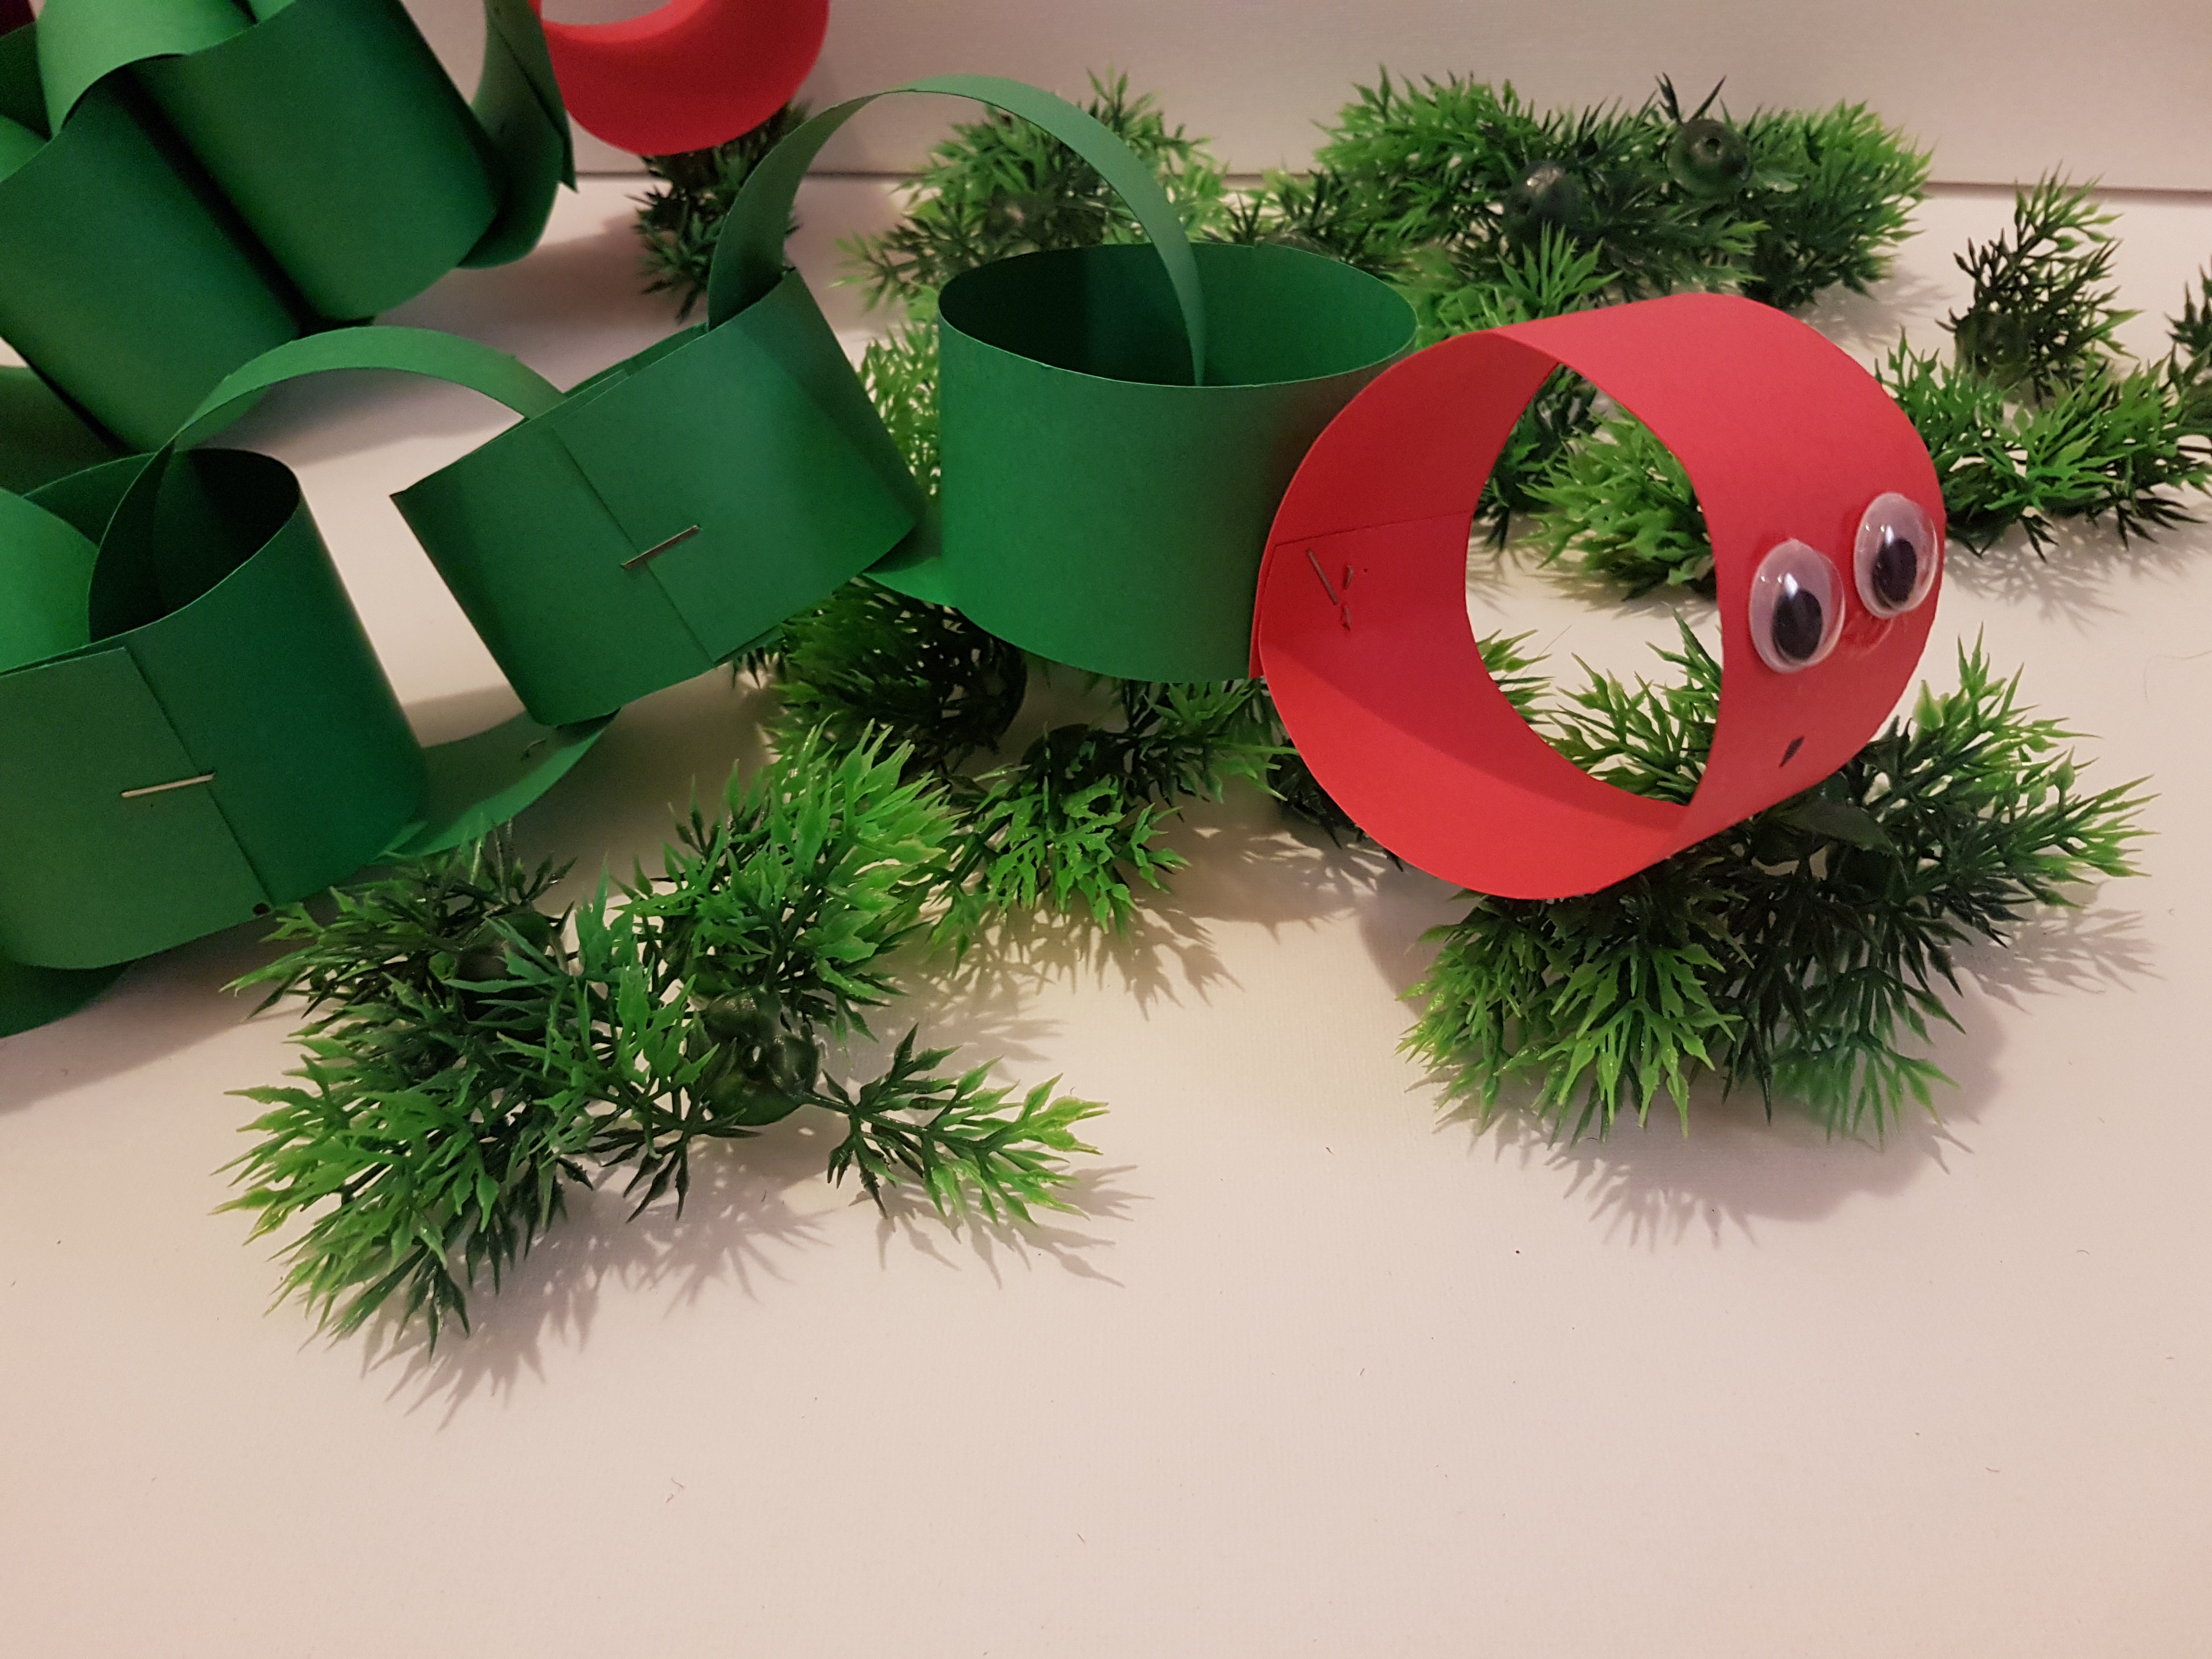 Perfect  Caterpillar Craft for kids who love the very famous book The Very Hungry Caterpillar by Eric Carle. #caterpillarcraft #caterpillarcraftforkids